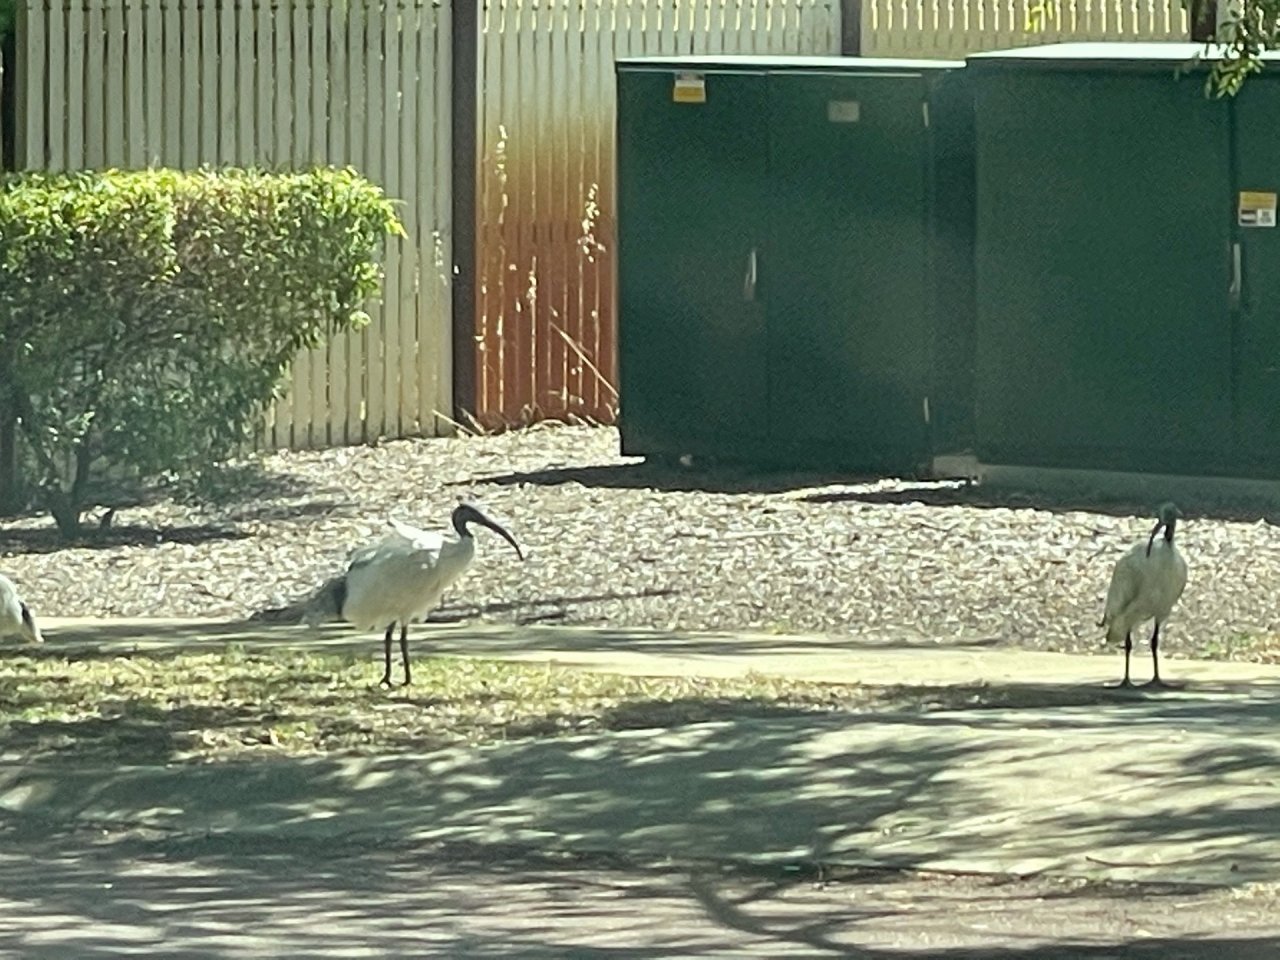 White Ibis in Big City Birds App spotted by Floyd Chris on 12.12.2020